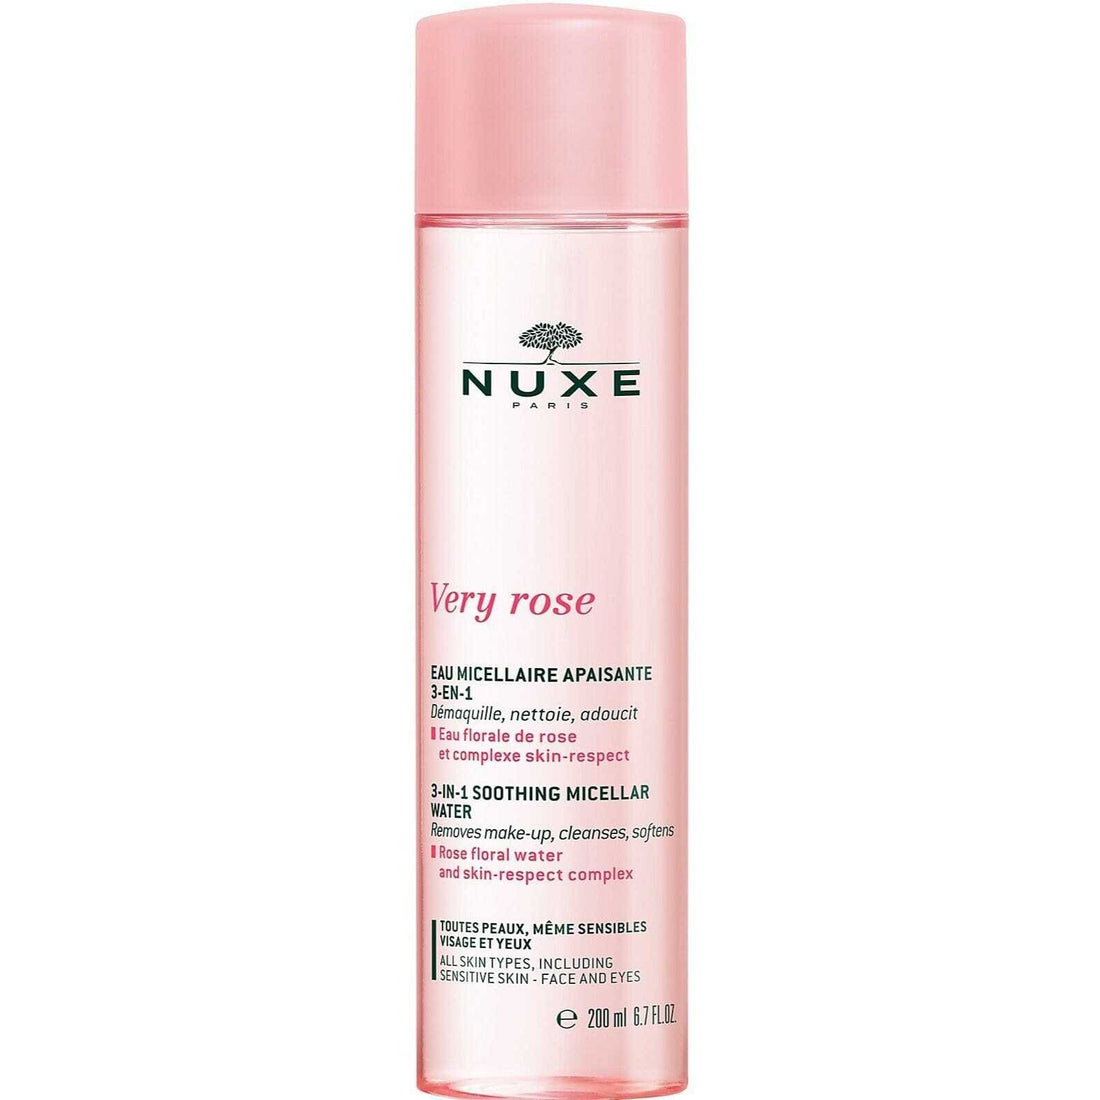 Nuxe Very Rose 3-in-1 Soothing Micellar Water Nuxe 6.7 fl. oz. (200ml) Shop at Skin Type Solutions